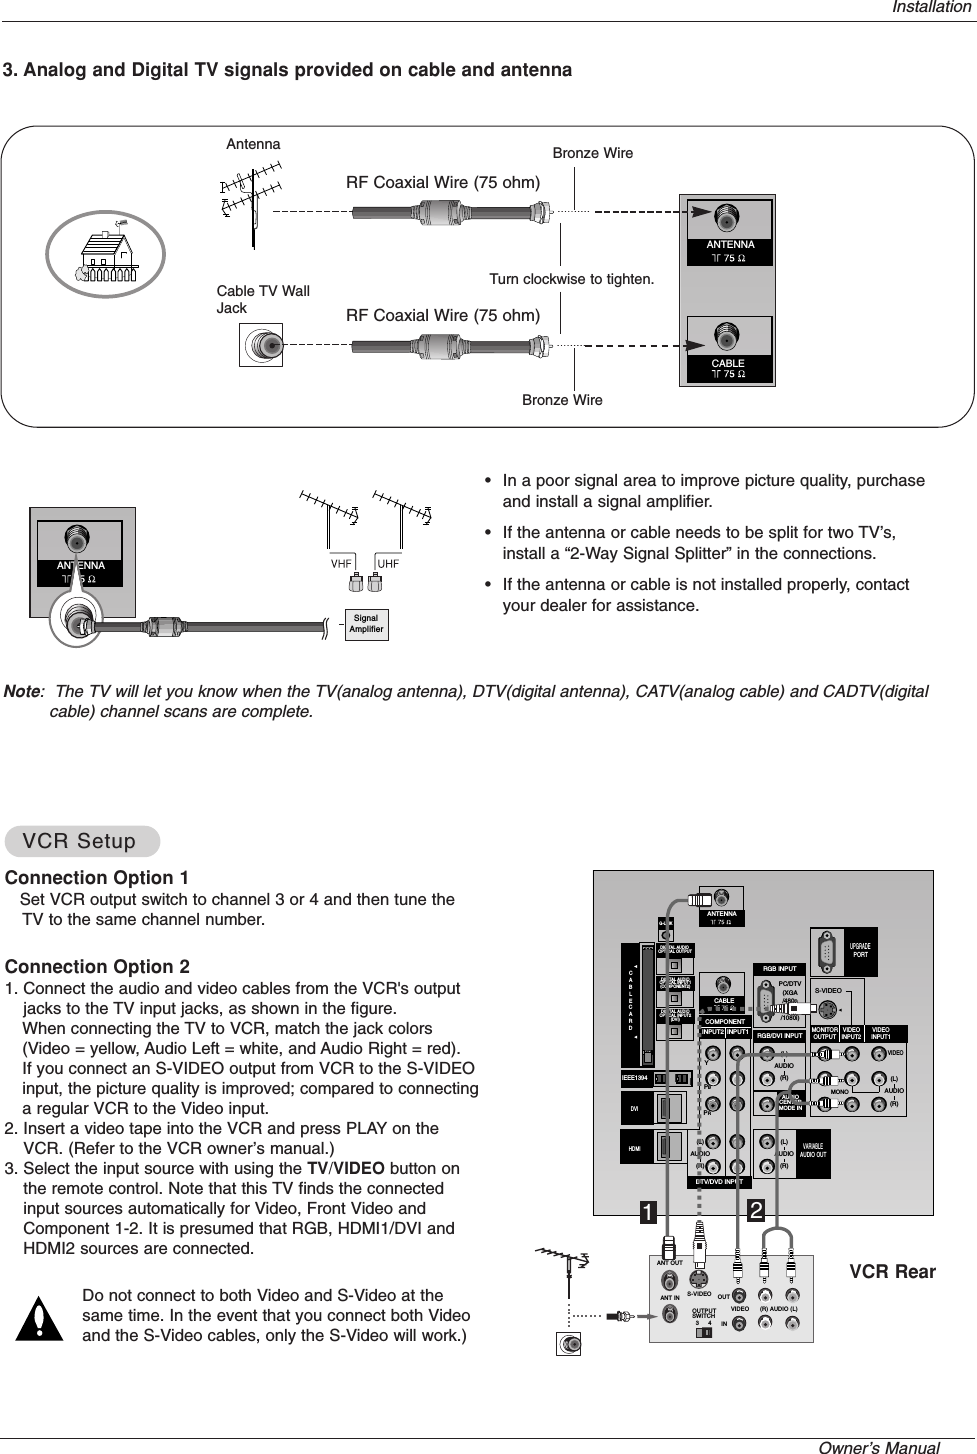 Owner’s Manual   Note:  The TV will let you know when the TV(analog antenna), DTV(digital antenna), CATV(analog cable) and CADTV(digitalcable) channel scans are complete.•In a poor signal area to improve picture quality, purchaseand install a signal amplifier.•If the antenna or cable needs to be split for two TV’s,install a “2-Way Signal Splitter” in the connections.•If the antenna or cable is not installed properly, contactyour dealer for assistance.ANTENNASignalAmplifier3. Analog and Digital TV signals provided on cable and antennaAntennaRF Coaxial Wire (75 ohm)Bronze WireTurn clockwise to tighten.Cable TV WallJack RF Coaxial Wire (75 ohm)CABLEANTENNAConnection Option 1Set VCR output switch to channel 3 or 4 and then tune theTV to the same channel number.Connection Option 21. Connect the audio and video cables from the VCR&apos;s outputjacks to the TV input jacks, as shown in the figure. When connecting the TV to VCR, match the jack colors(Video = yellow, Audio Left = white, and Audio Right = red).If you connect an S-VIDEO output from VCR to the S-VIDEOinput, the picture quality is improved; compared to connectinga regular VCR to the Video input.2. Insert a video tape into the VCR and press PLAY on theVCR. (Refer to the VCR owner’s manual.) 3. Select the input source with using the TV/VIDEO button onthe remote control. Note that this TV finds the connectedinput sources automatically for Video, Front Video andComponent 1-2. It is presumed that RGB, HDMI1/DVI andHDMI2 sources are connected.Do not connect to both Video and S-Video at thesame time. In the event that you connect both Videoand the S-Video cables, only the S-Video will work.)VCR SetupVCR SetupPC/DTV(XGA/480p/720p/1080i)S-VIDEOPR PBYMONOCABLERGB INPUTCOMPONENTINPUT2 INPUT1DTV/DVD INPUTRGB/DVI INPUT(L)(R)AUDIO(L)(R)AUDIOVIDEO(L)(R)AUDIO(L)(R)AUDIOAUDIOCENTERMODE INMONITOROUTPUTVIDEOINPUT2VIDEOINPUT1DIGITAL AUDIOOPTICAL INPUT1(COMPONENT2)DIGITAL AUDIOOPTICAL INPUT2(DVI)IEEE1394DIGITAL AUDIO OPTICAL OUTPUTANTENNACABLECARD DVI VARIABLEAUDIO OUTG-LINK HDMIUPGRADEPORTS-VIDEO OUTIN(R) AUDIO (L)VIDEO34OUTPUTSWITCHANT OUTANT INVCR Rear12InstallationBronze Wire